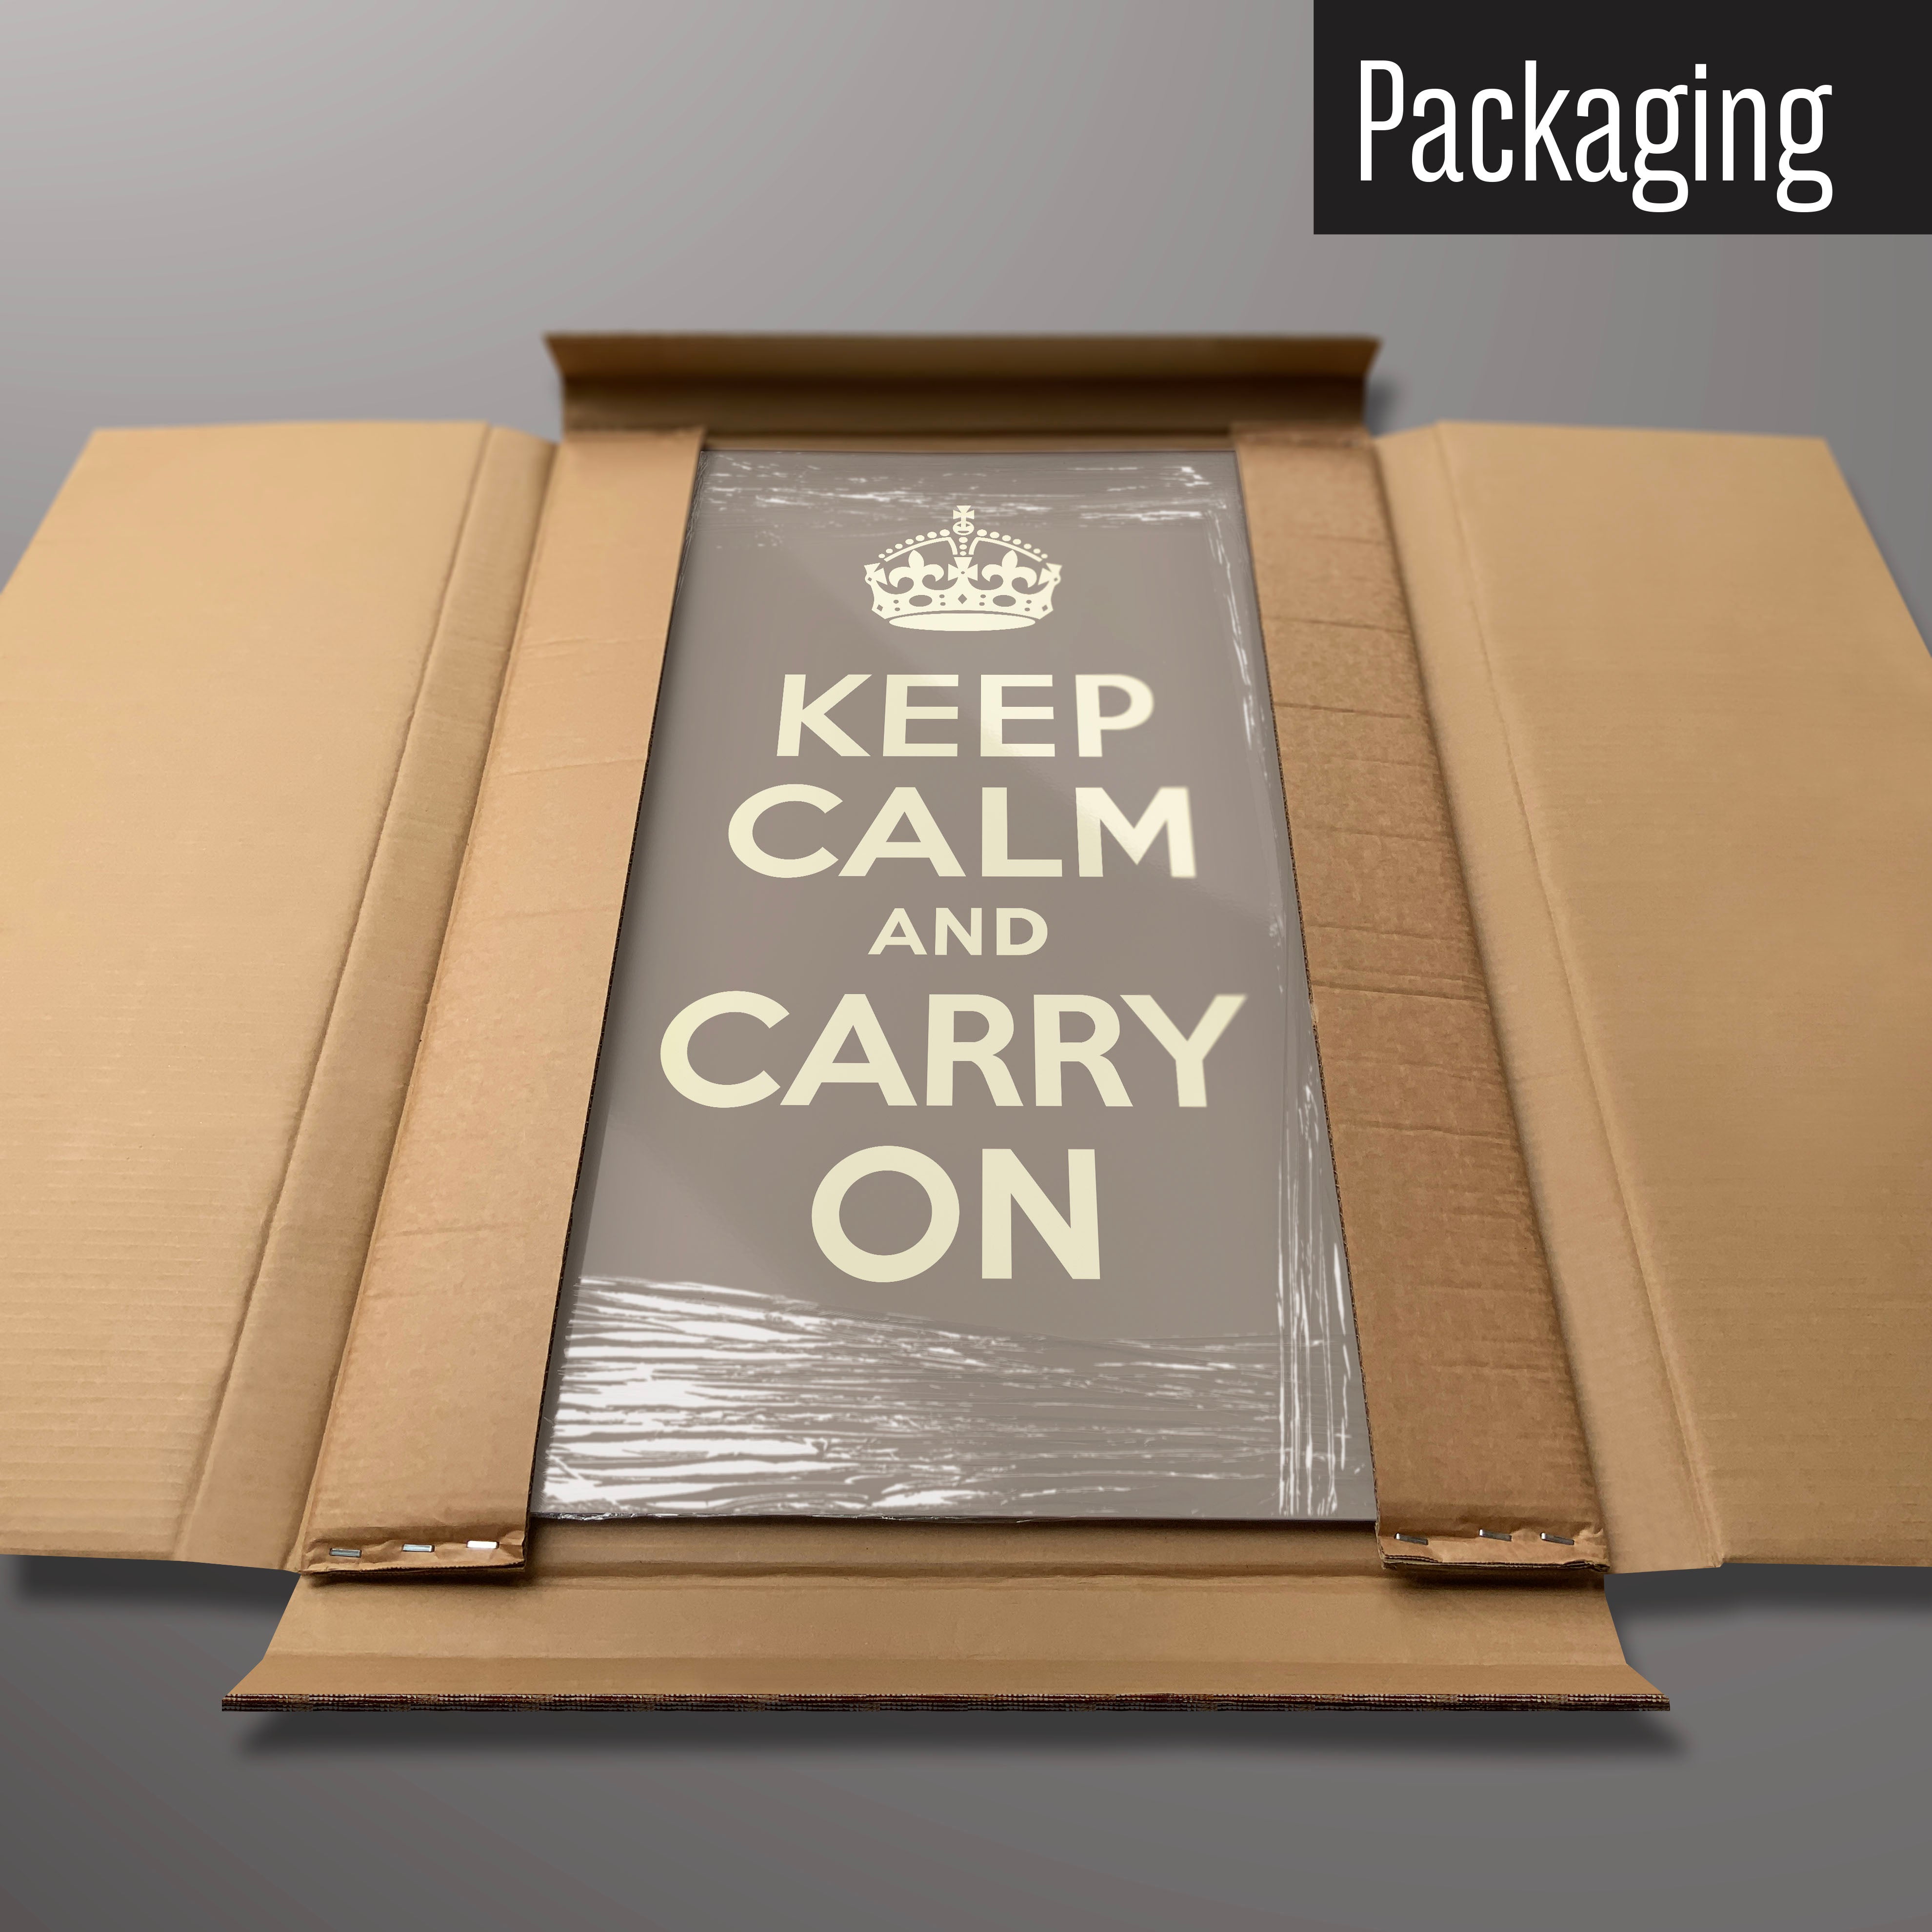 A brown keep calm and carry on magnetic board in it’s cardboard packaging